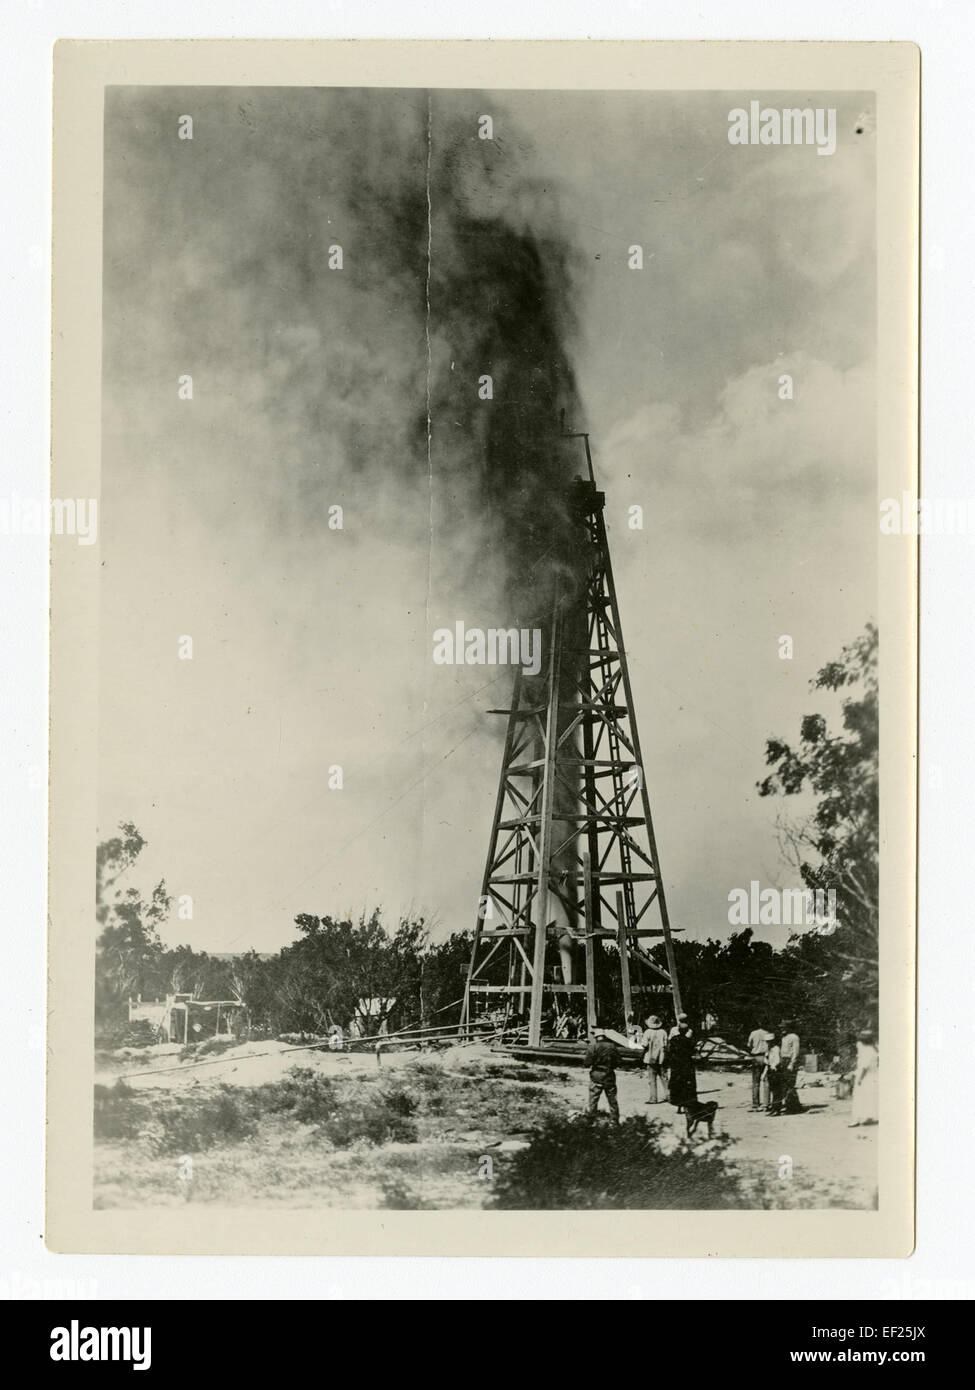 Oil Well Gusher High Resolution Stock Photography and Images - Alamy